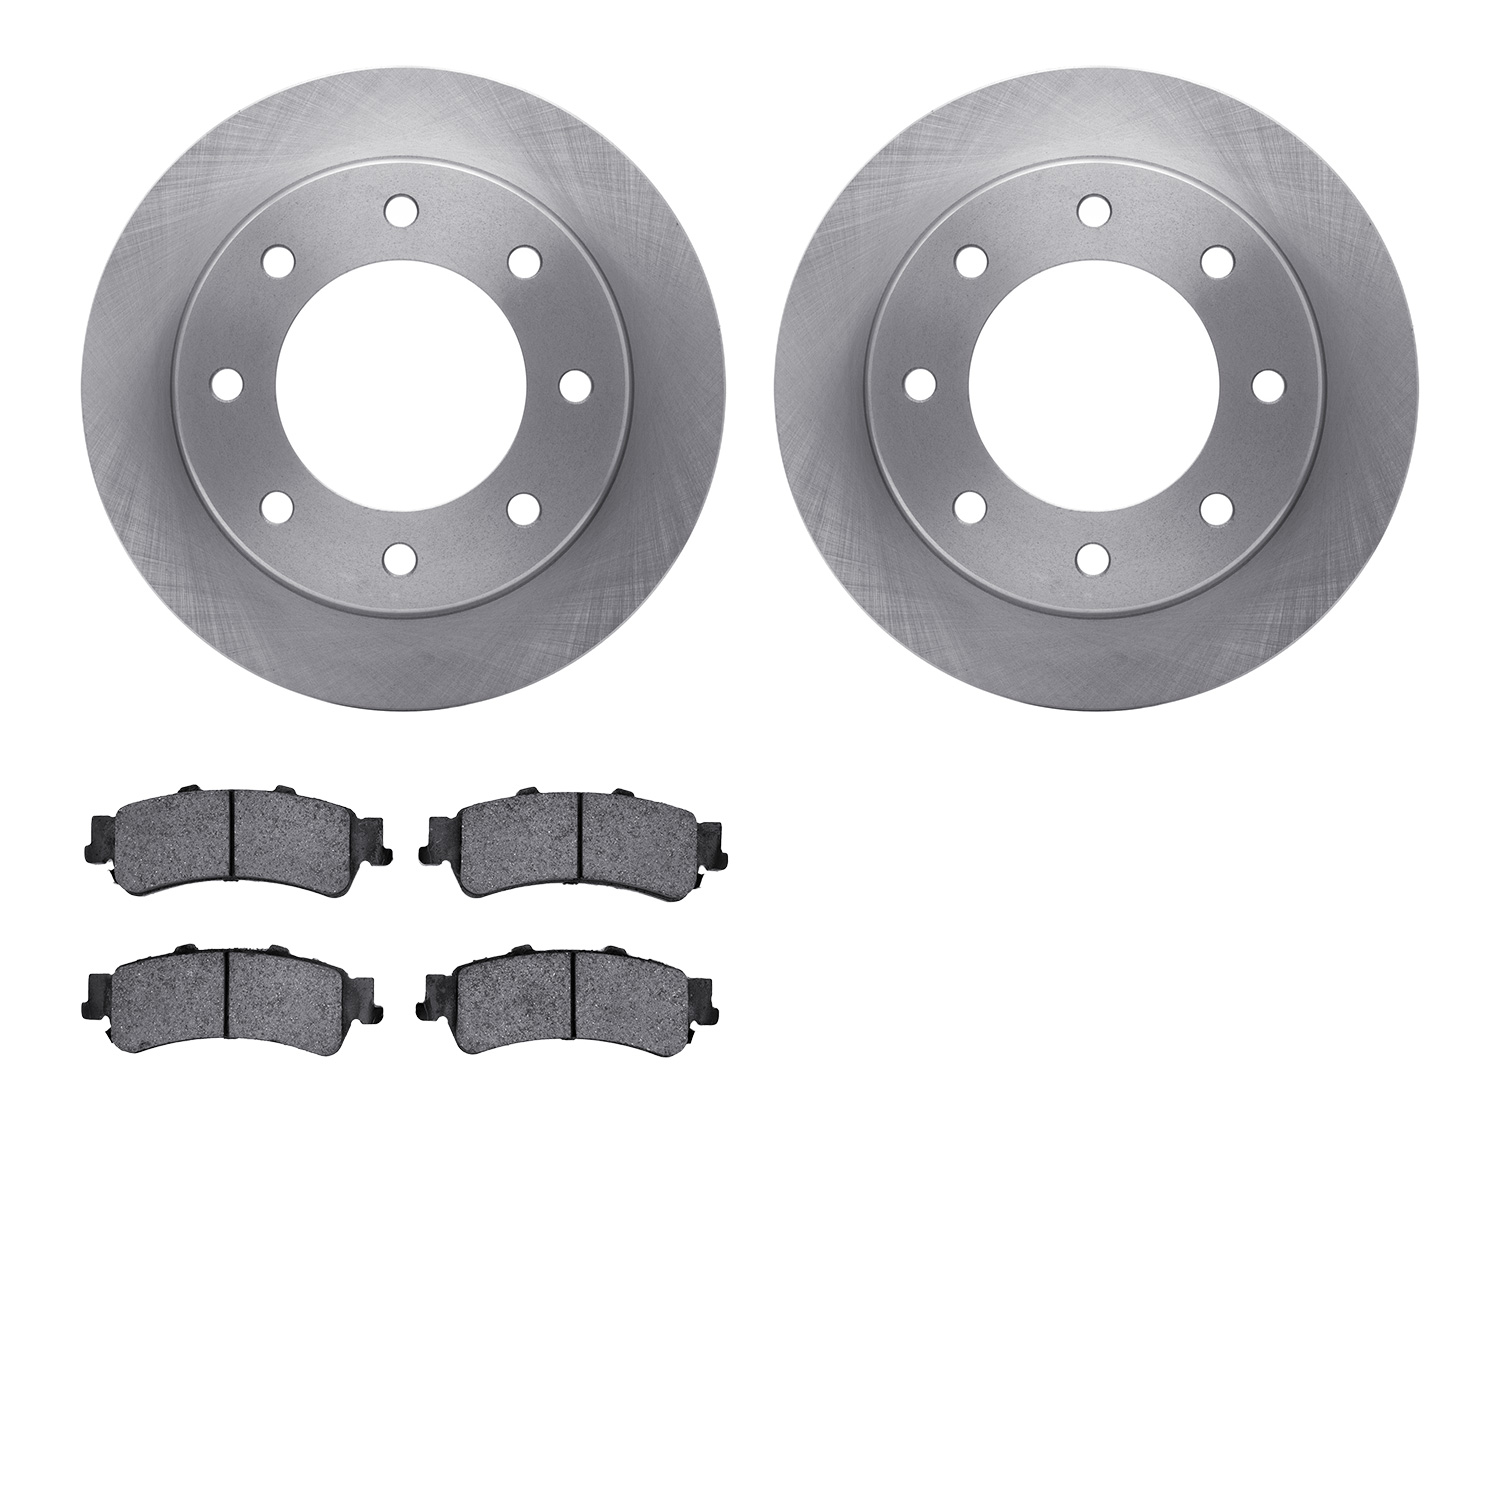 6402-46013 Brake Rotors with Ultimate-Duty Brake Pads, 2000-2011 GM, Position: Rear